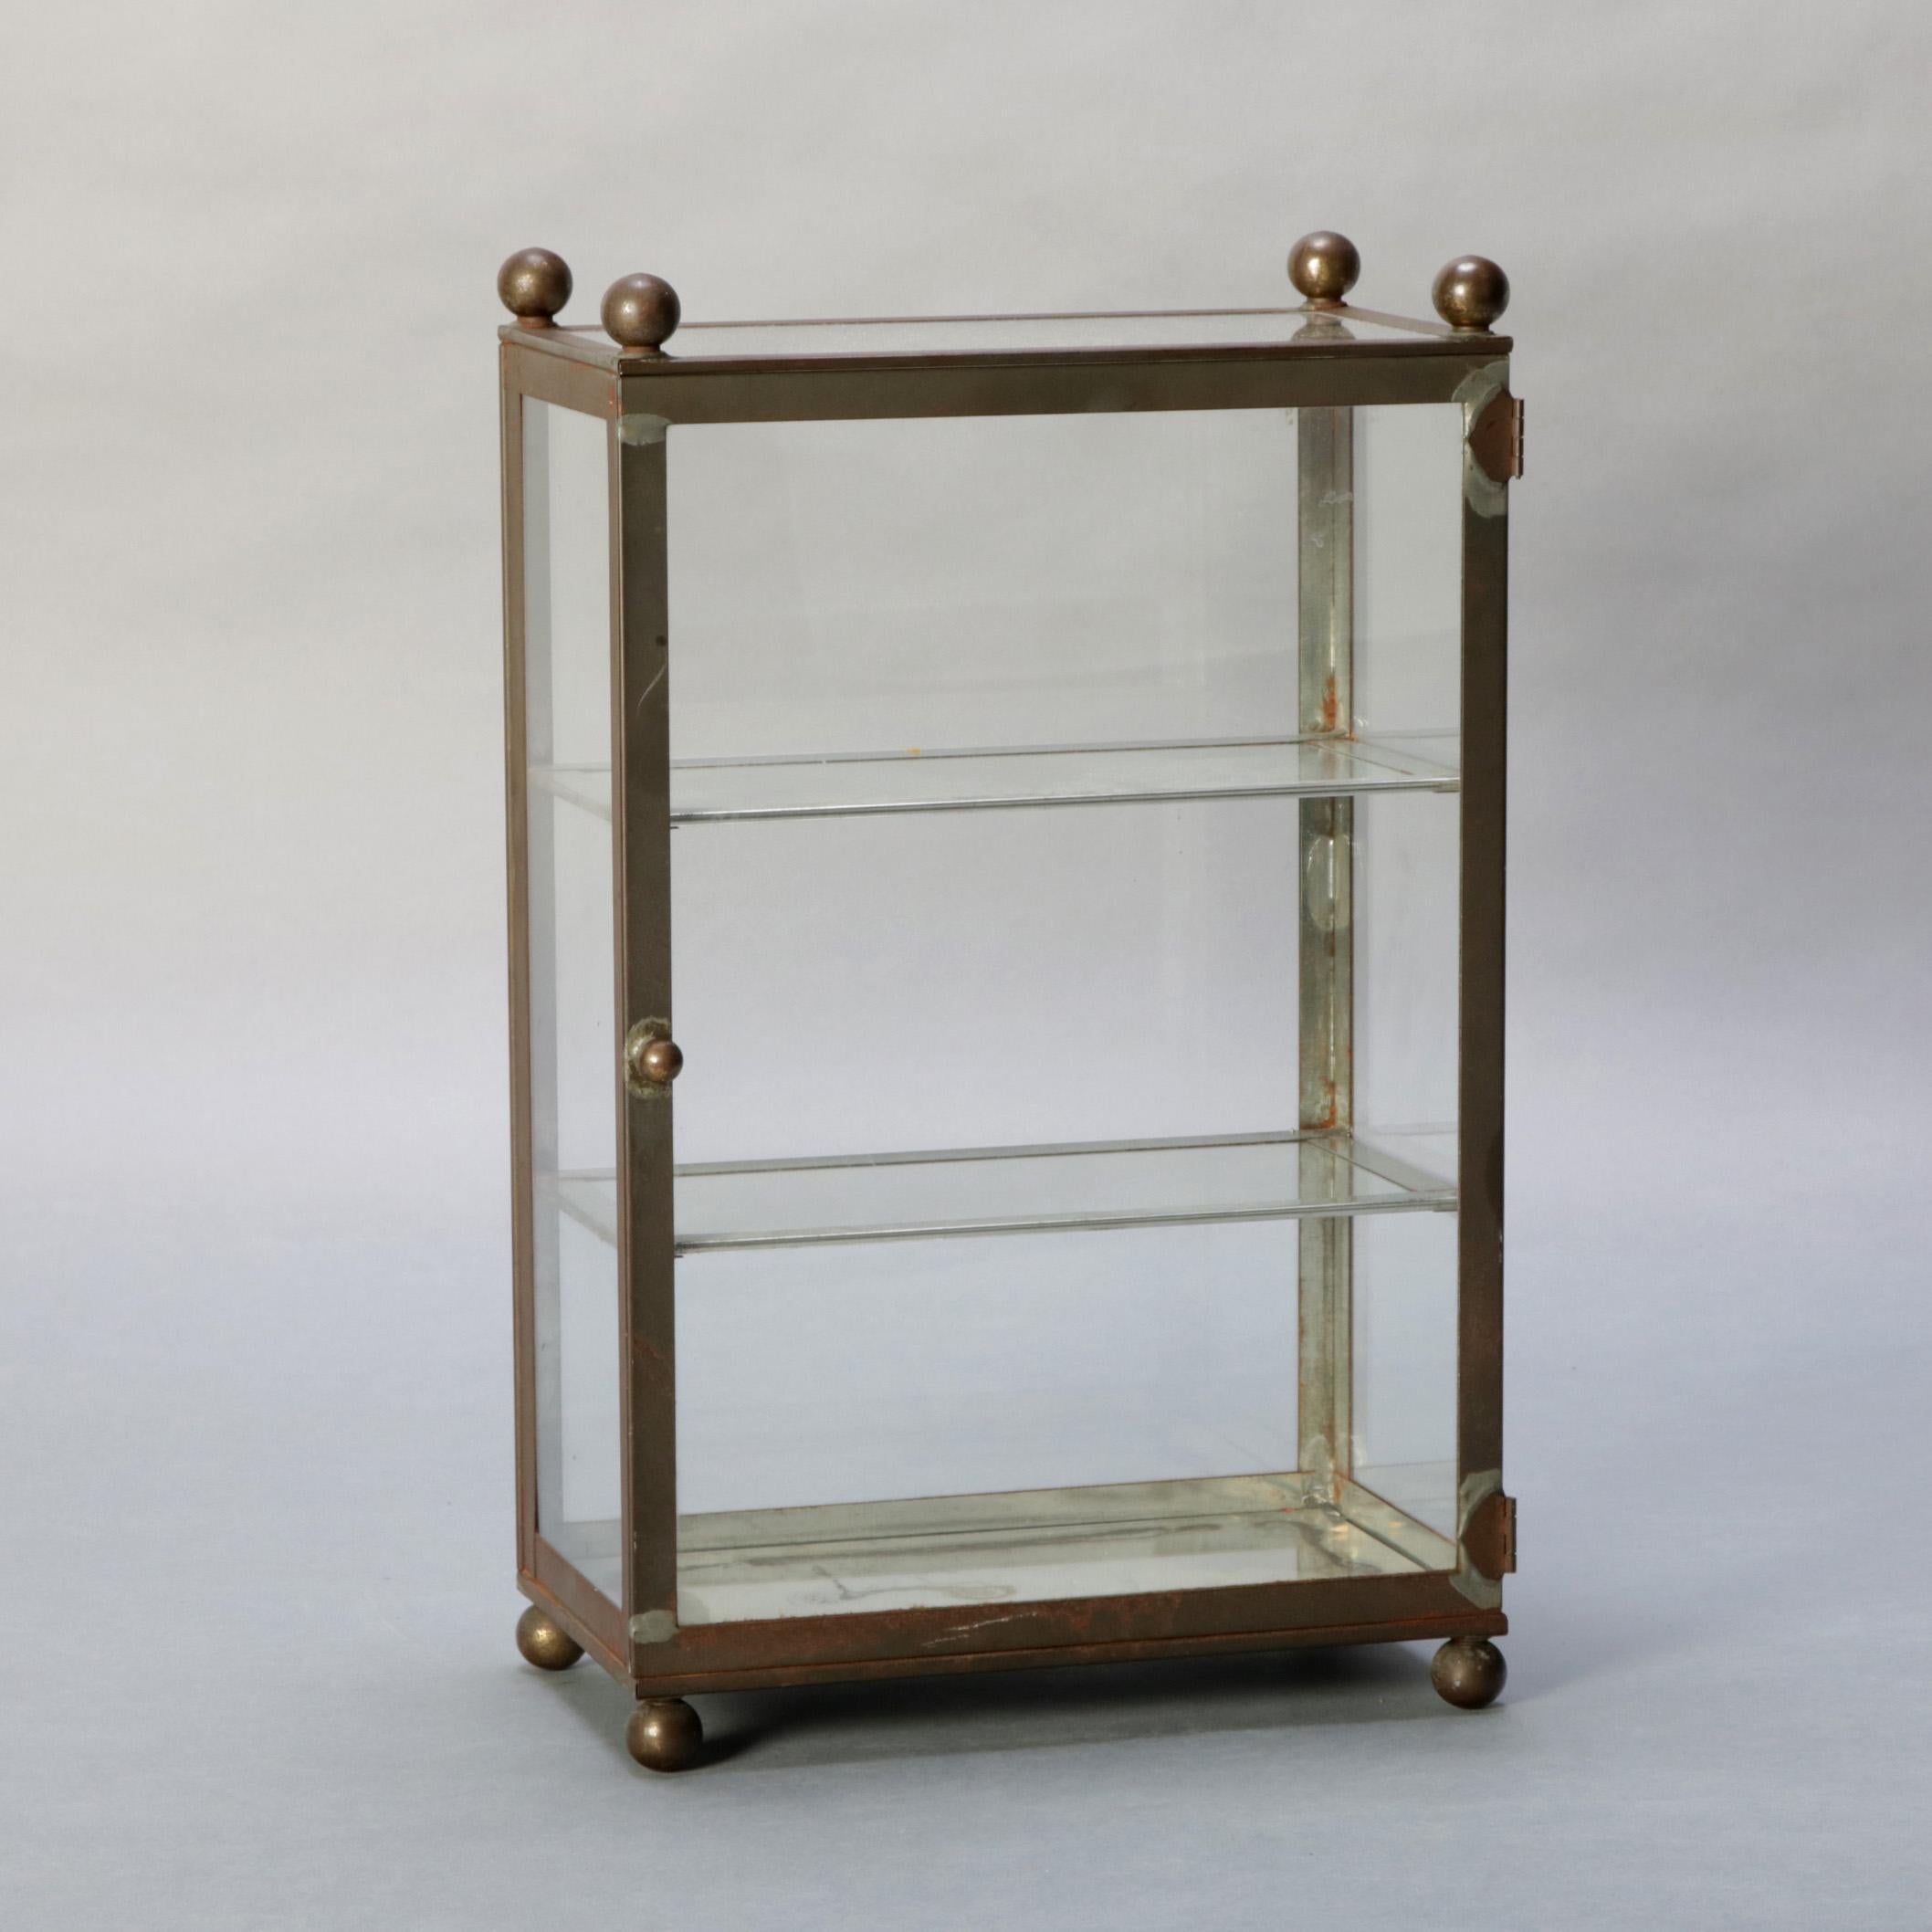 An antique dresser or counter top trinket or jewelry vitrine features brass frame with ball finials and feet with glass sides and door opening to display having two glass shelves and mirrored base, 20th century

Measures: 16.25